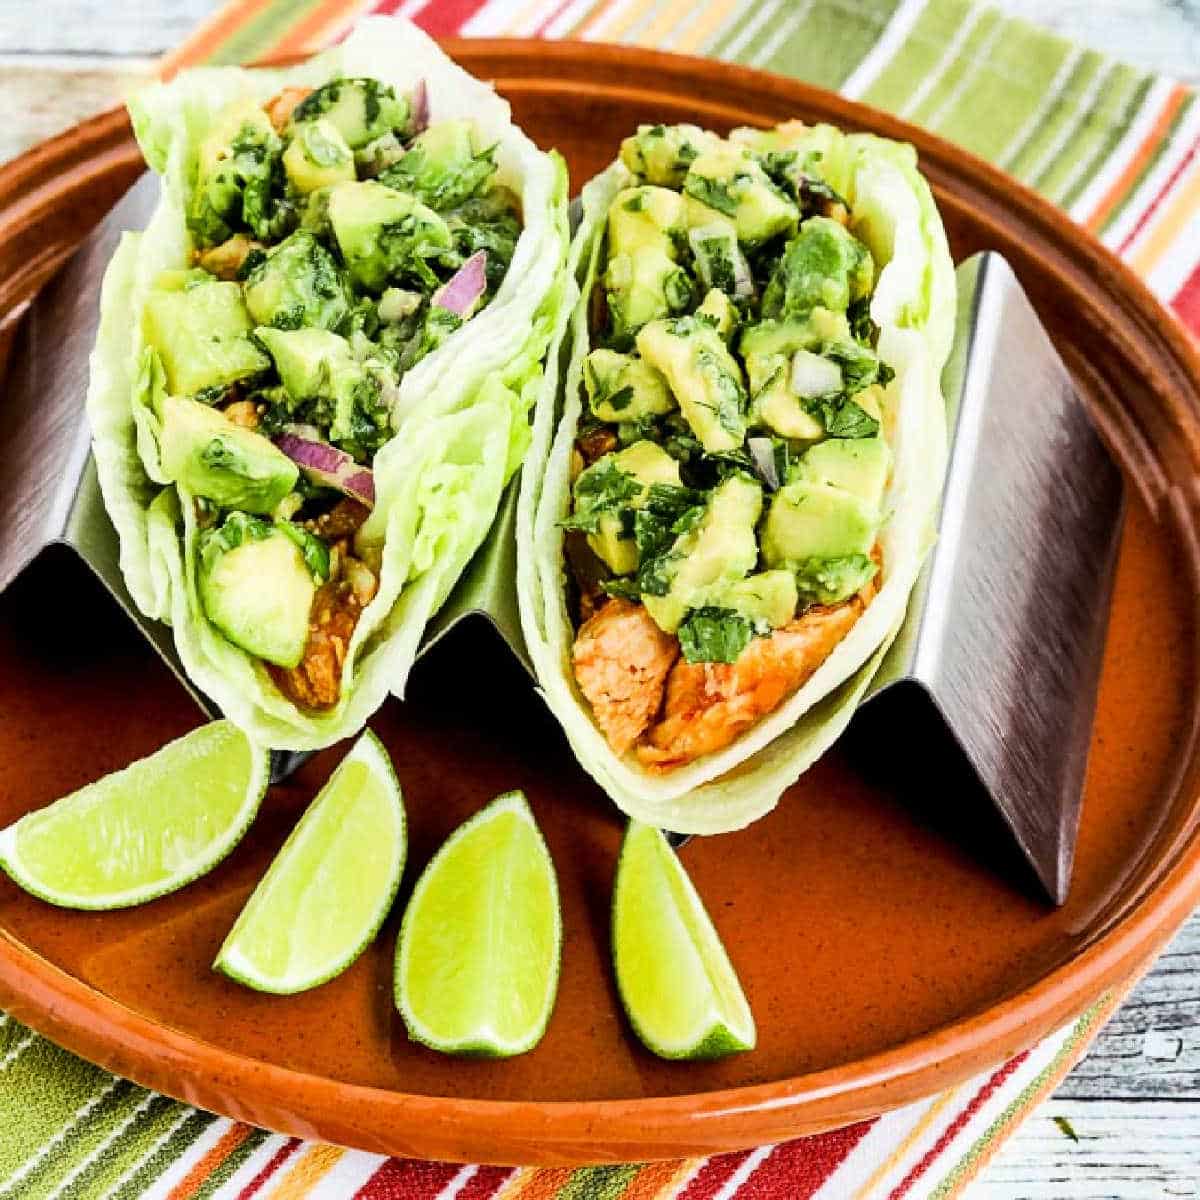 Square image of Spicy Shredded Chicken Lettuce Wrap Tacos on serving plate in taco holder, with limes.